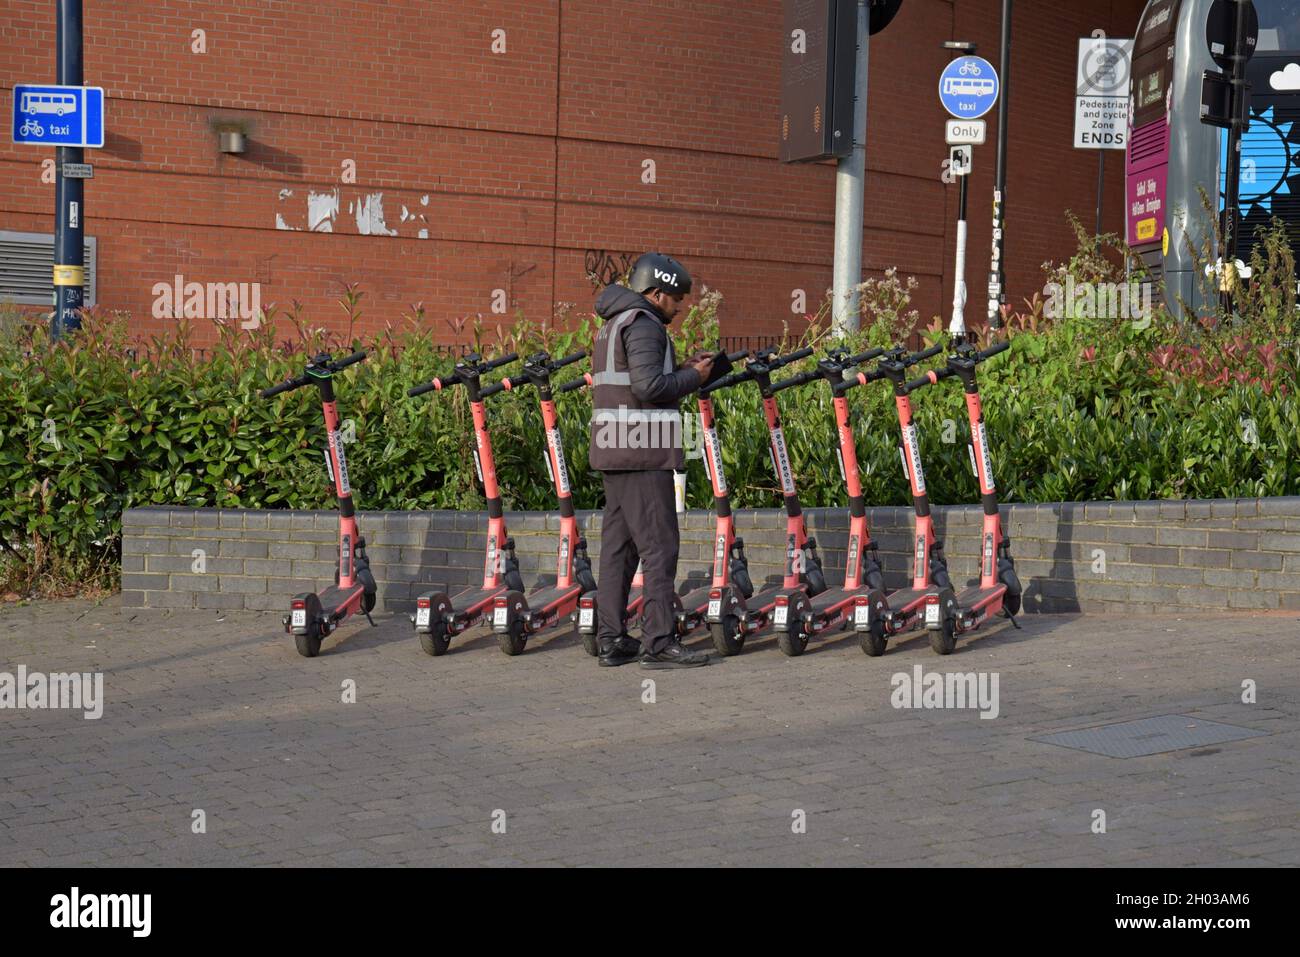 A member of staff at Voi Scooters checks a row of electric hire scooters outside the Bull Ring, Grand Central, Birmingham. August 2021 Stock Photo